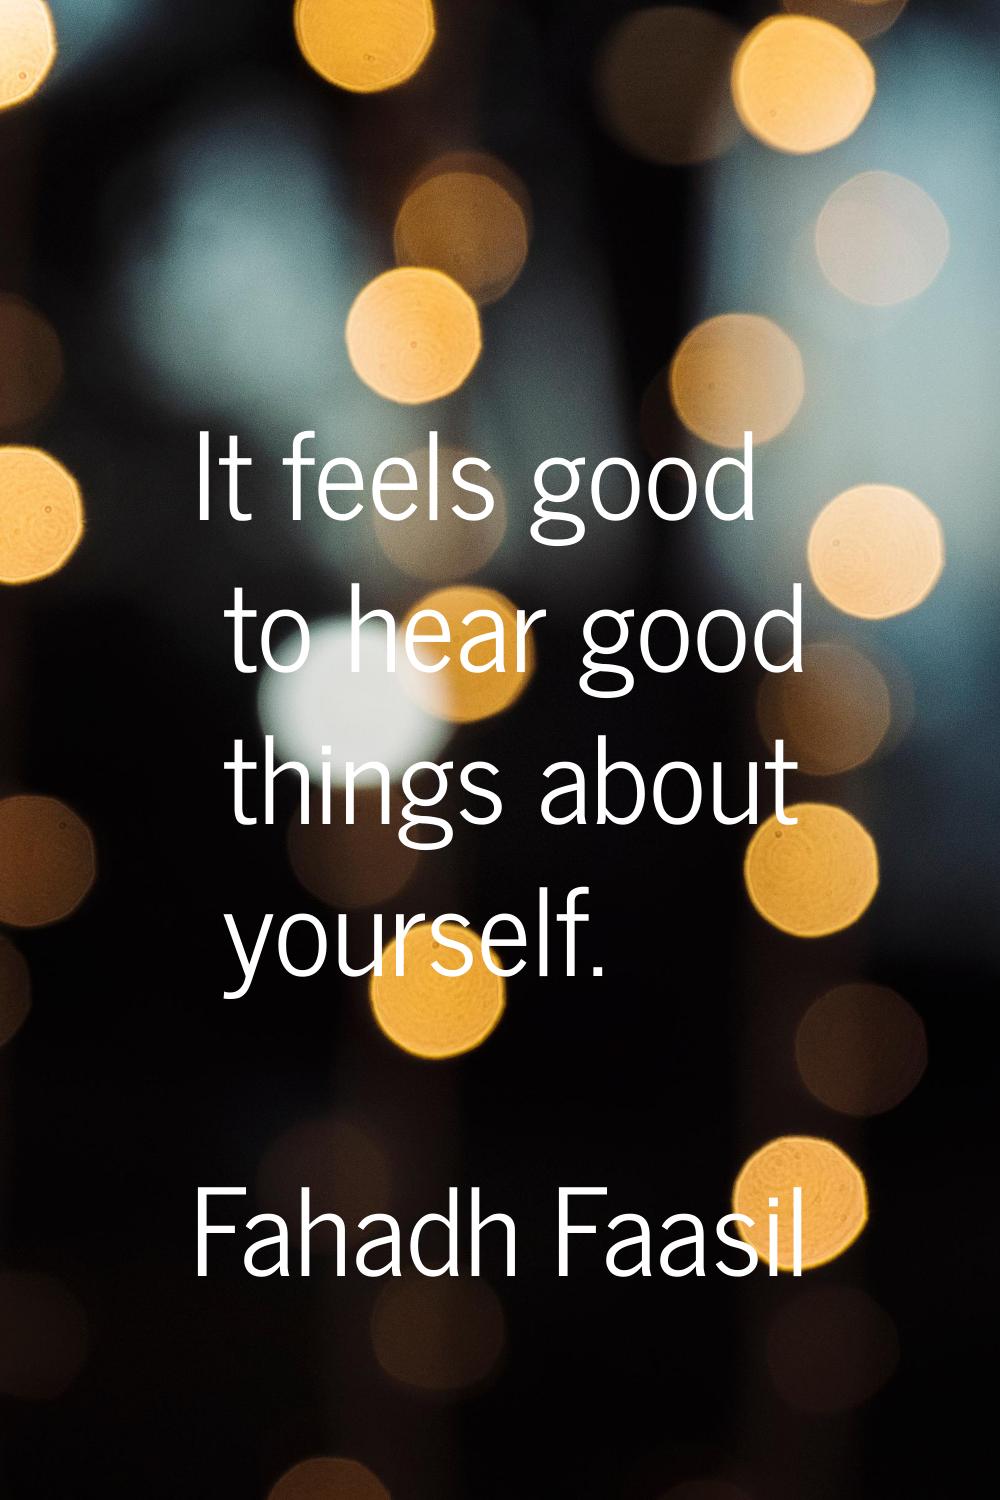 It feels good to hear good things about yourself.